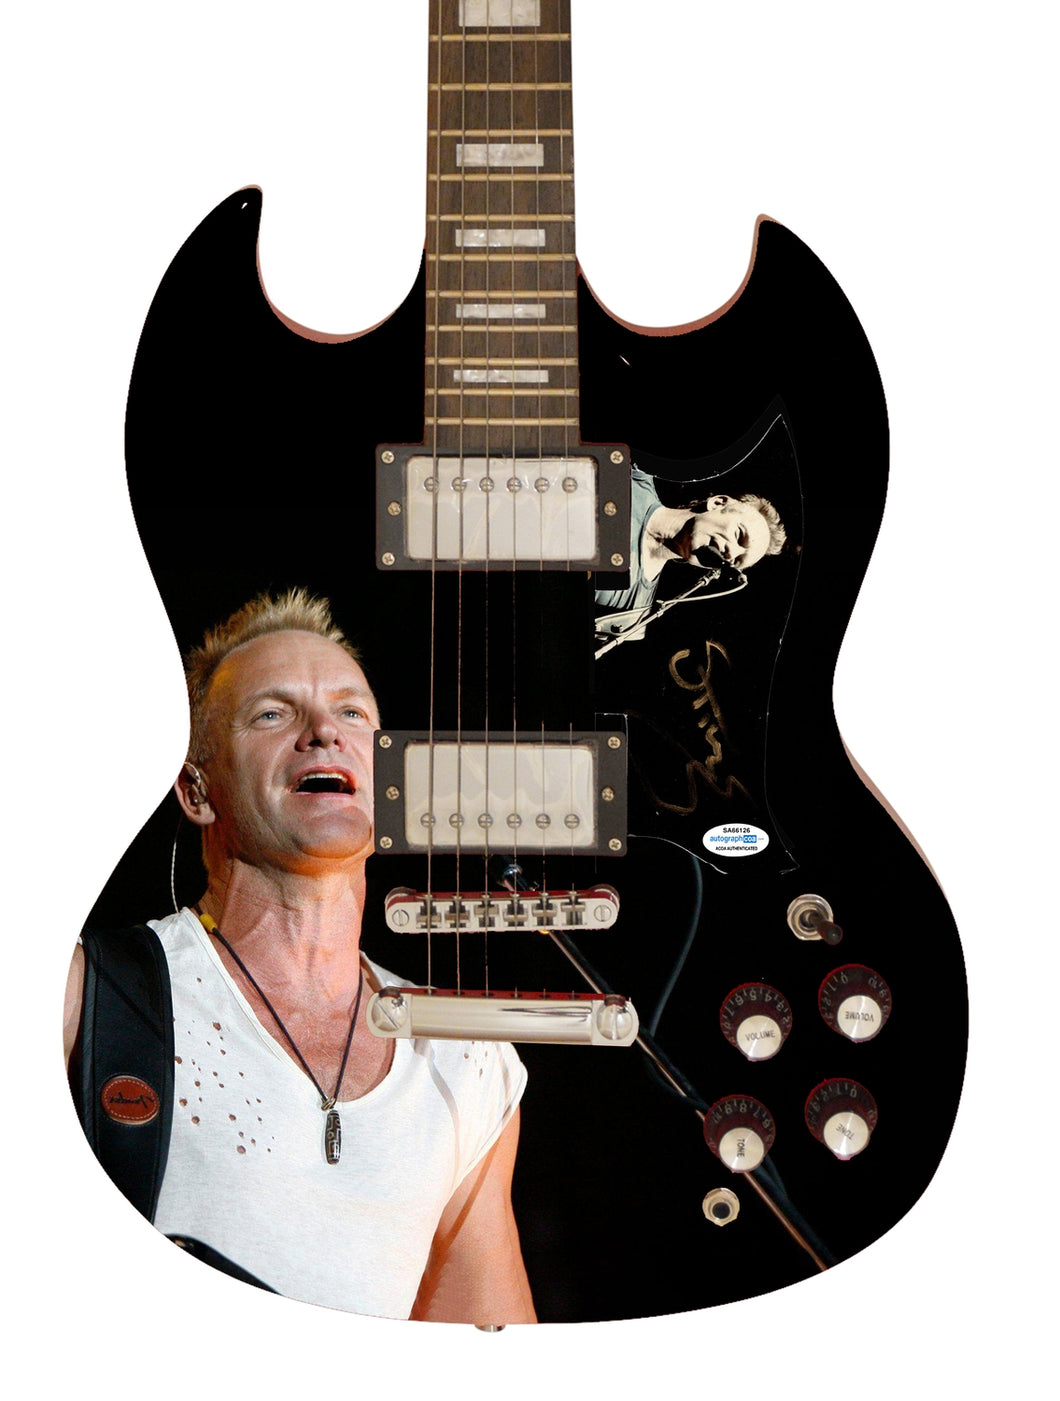 Sting Autographed Signed Photo Graphics Guitar ACOA